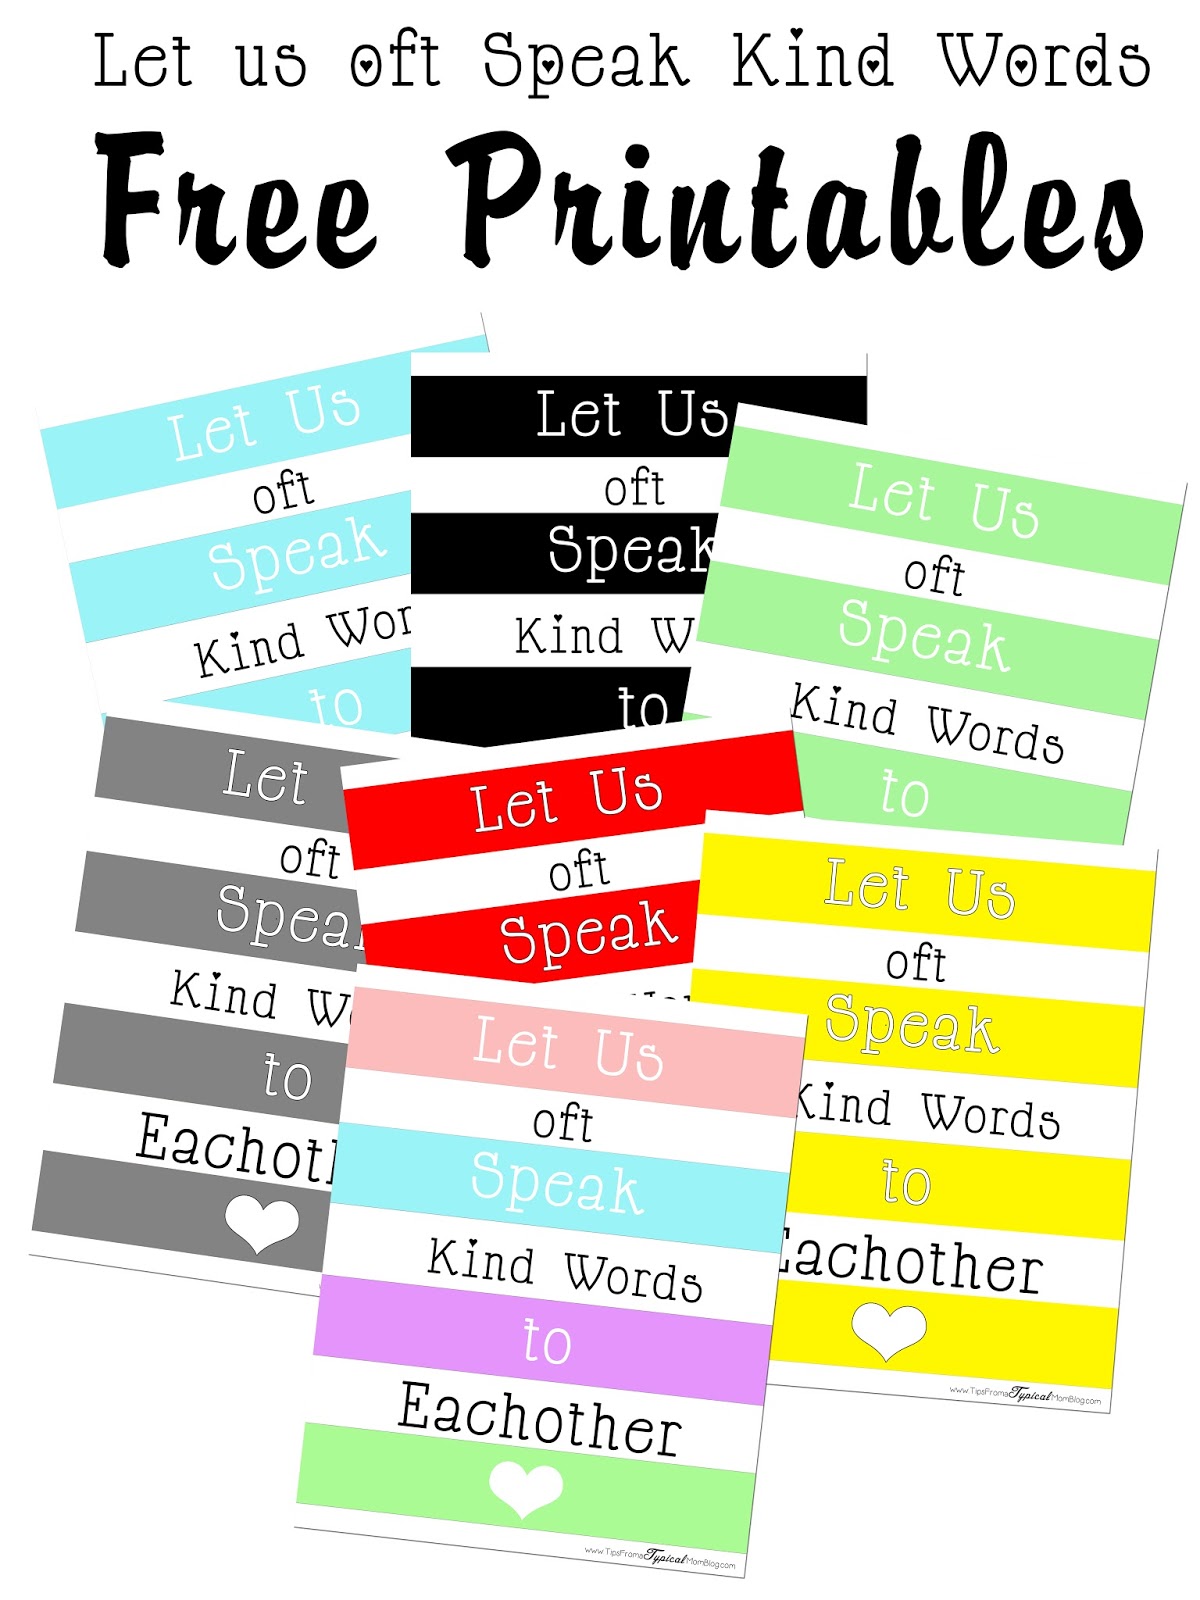 Bullying, Stop it! How bullying affected my life with a free printable.